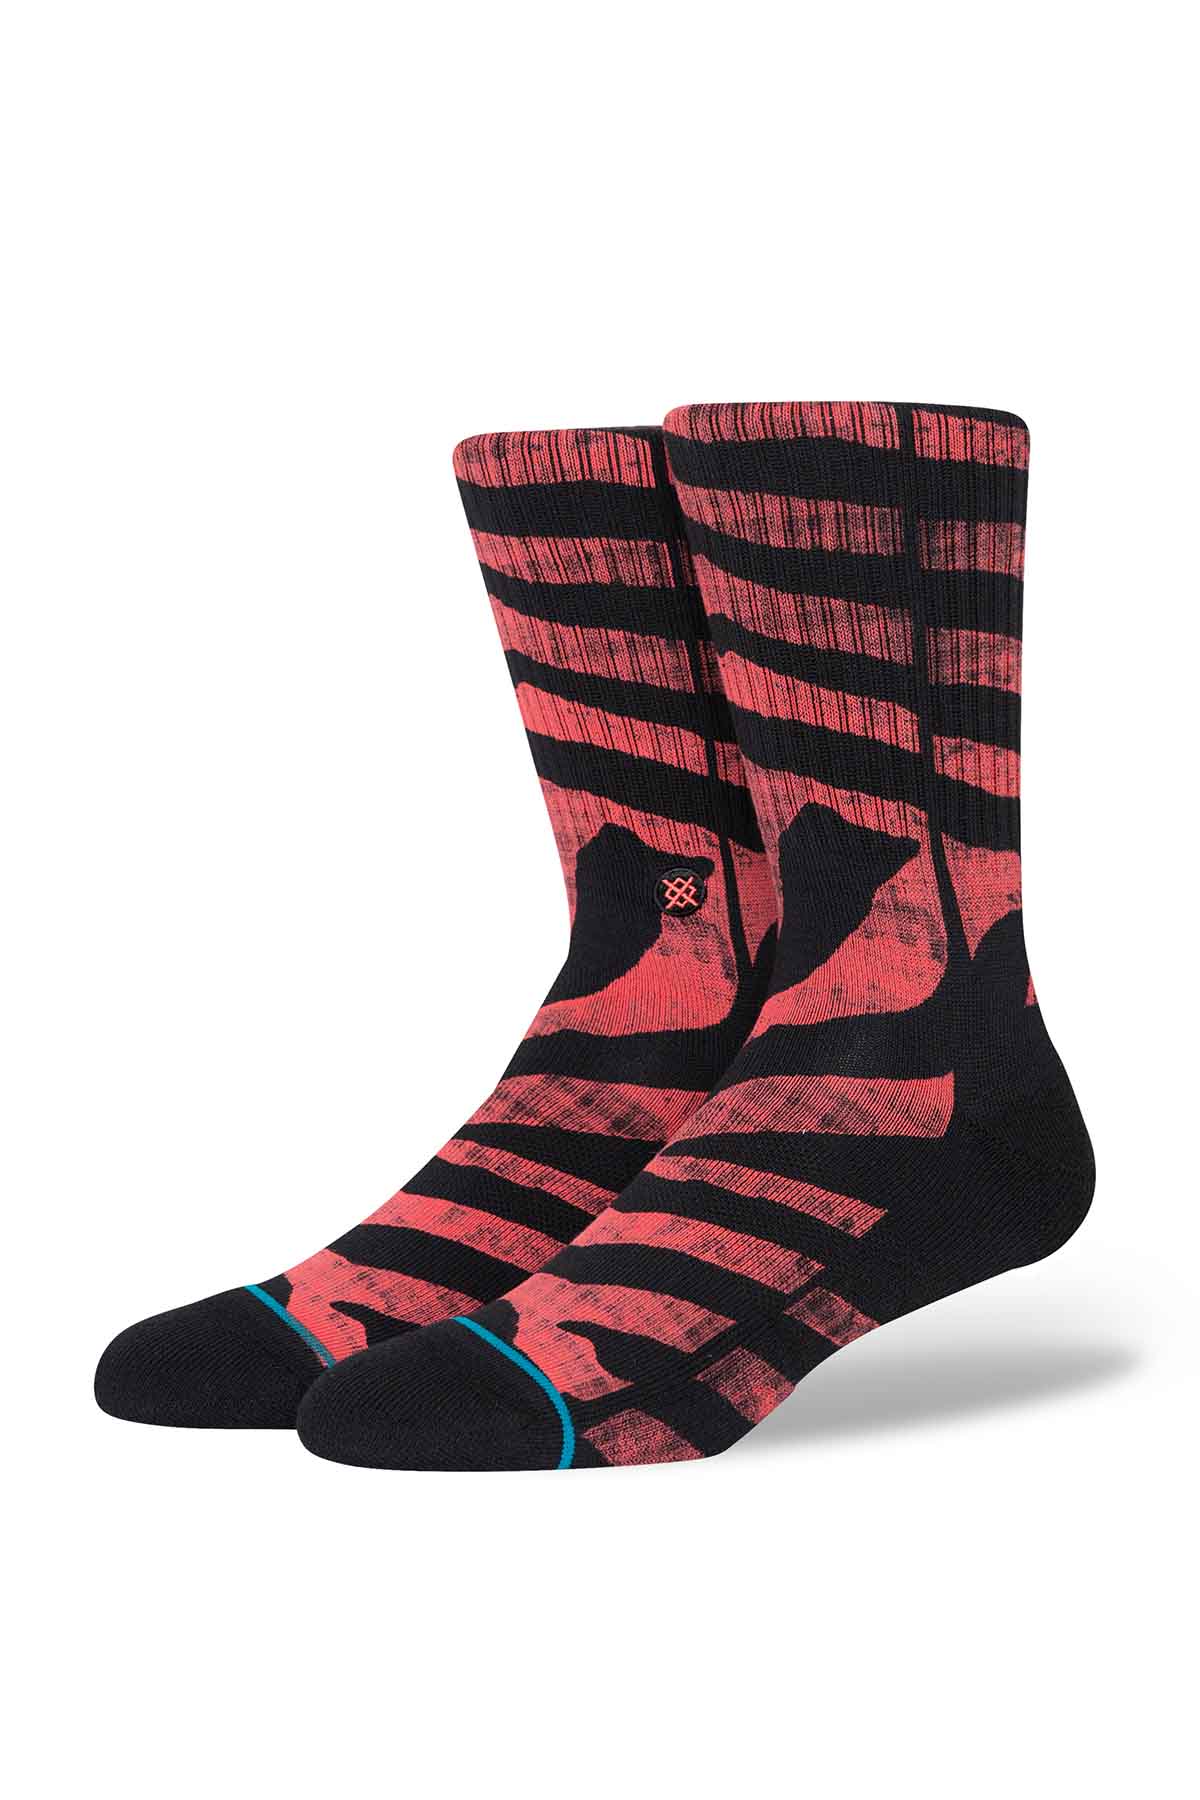 Stance - Voodue - Red